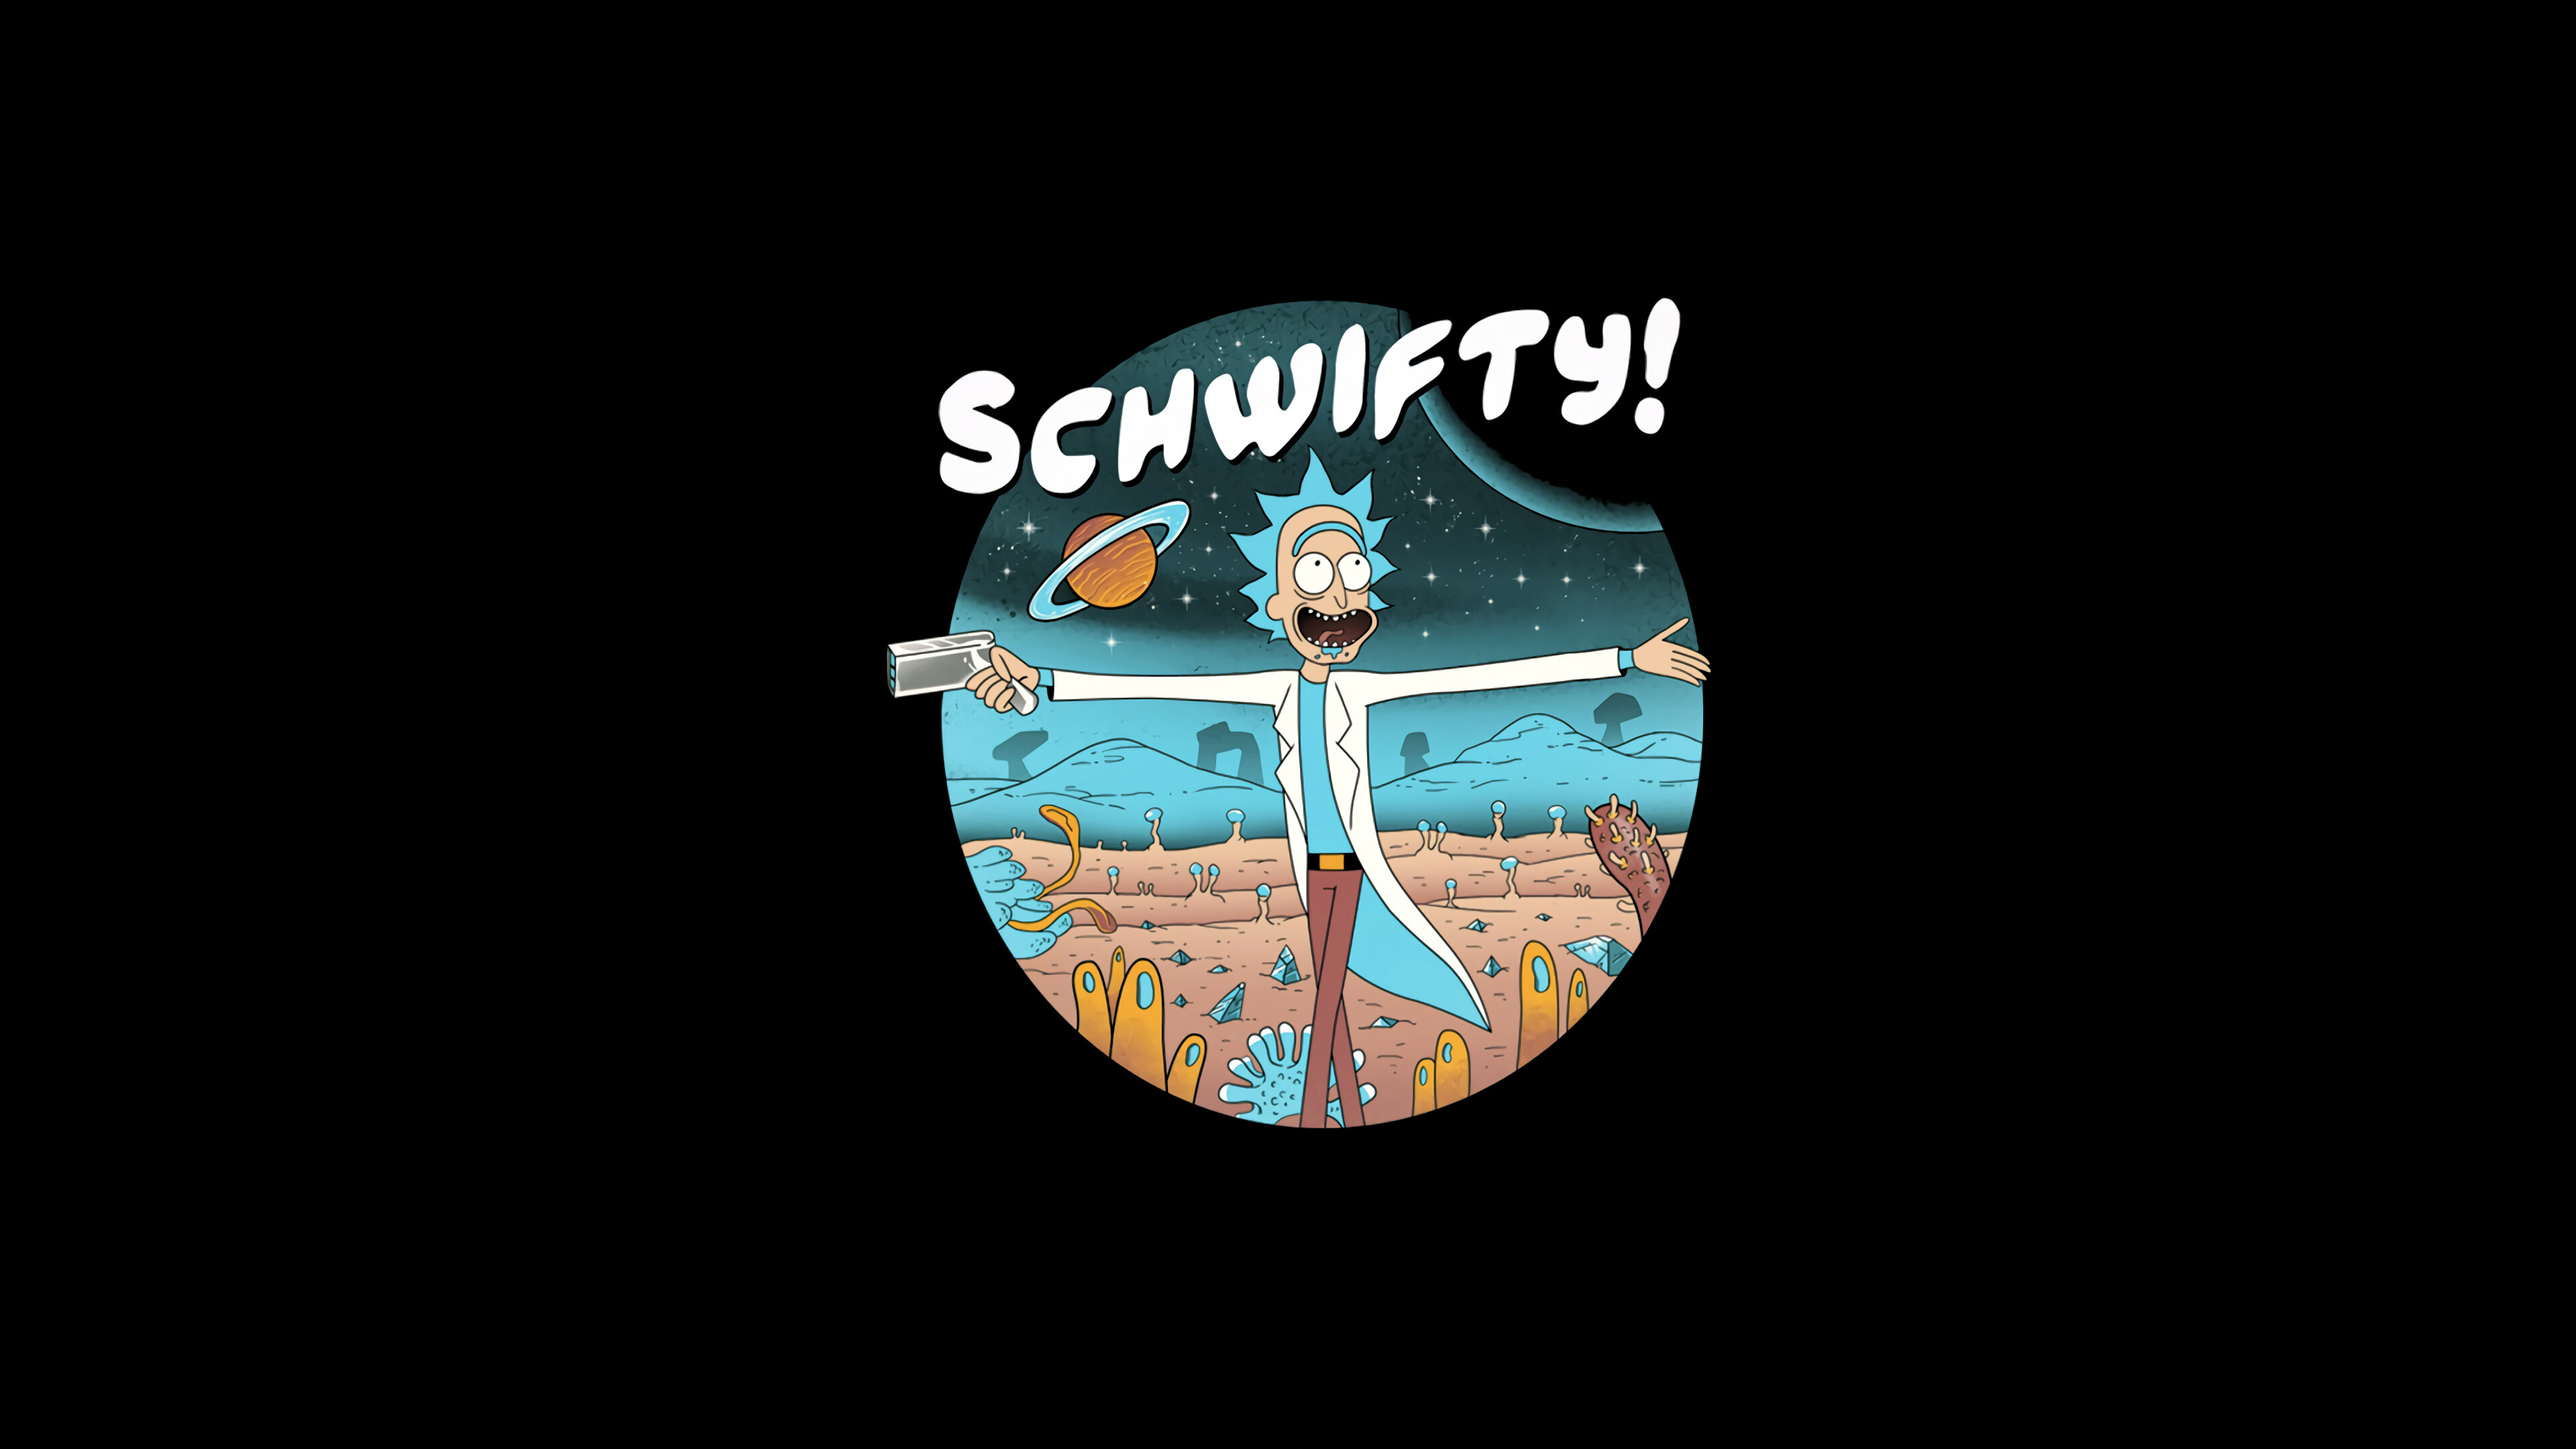 Rick and Morty: Schifty, Character, inspired by Christopher Lloyd's Dr. Emmett "Doc" Brown. 3840x2160 4K Background.